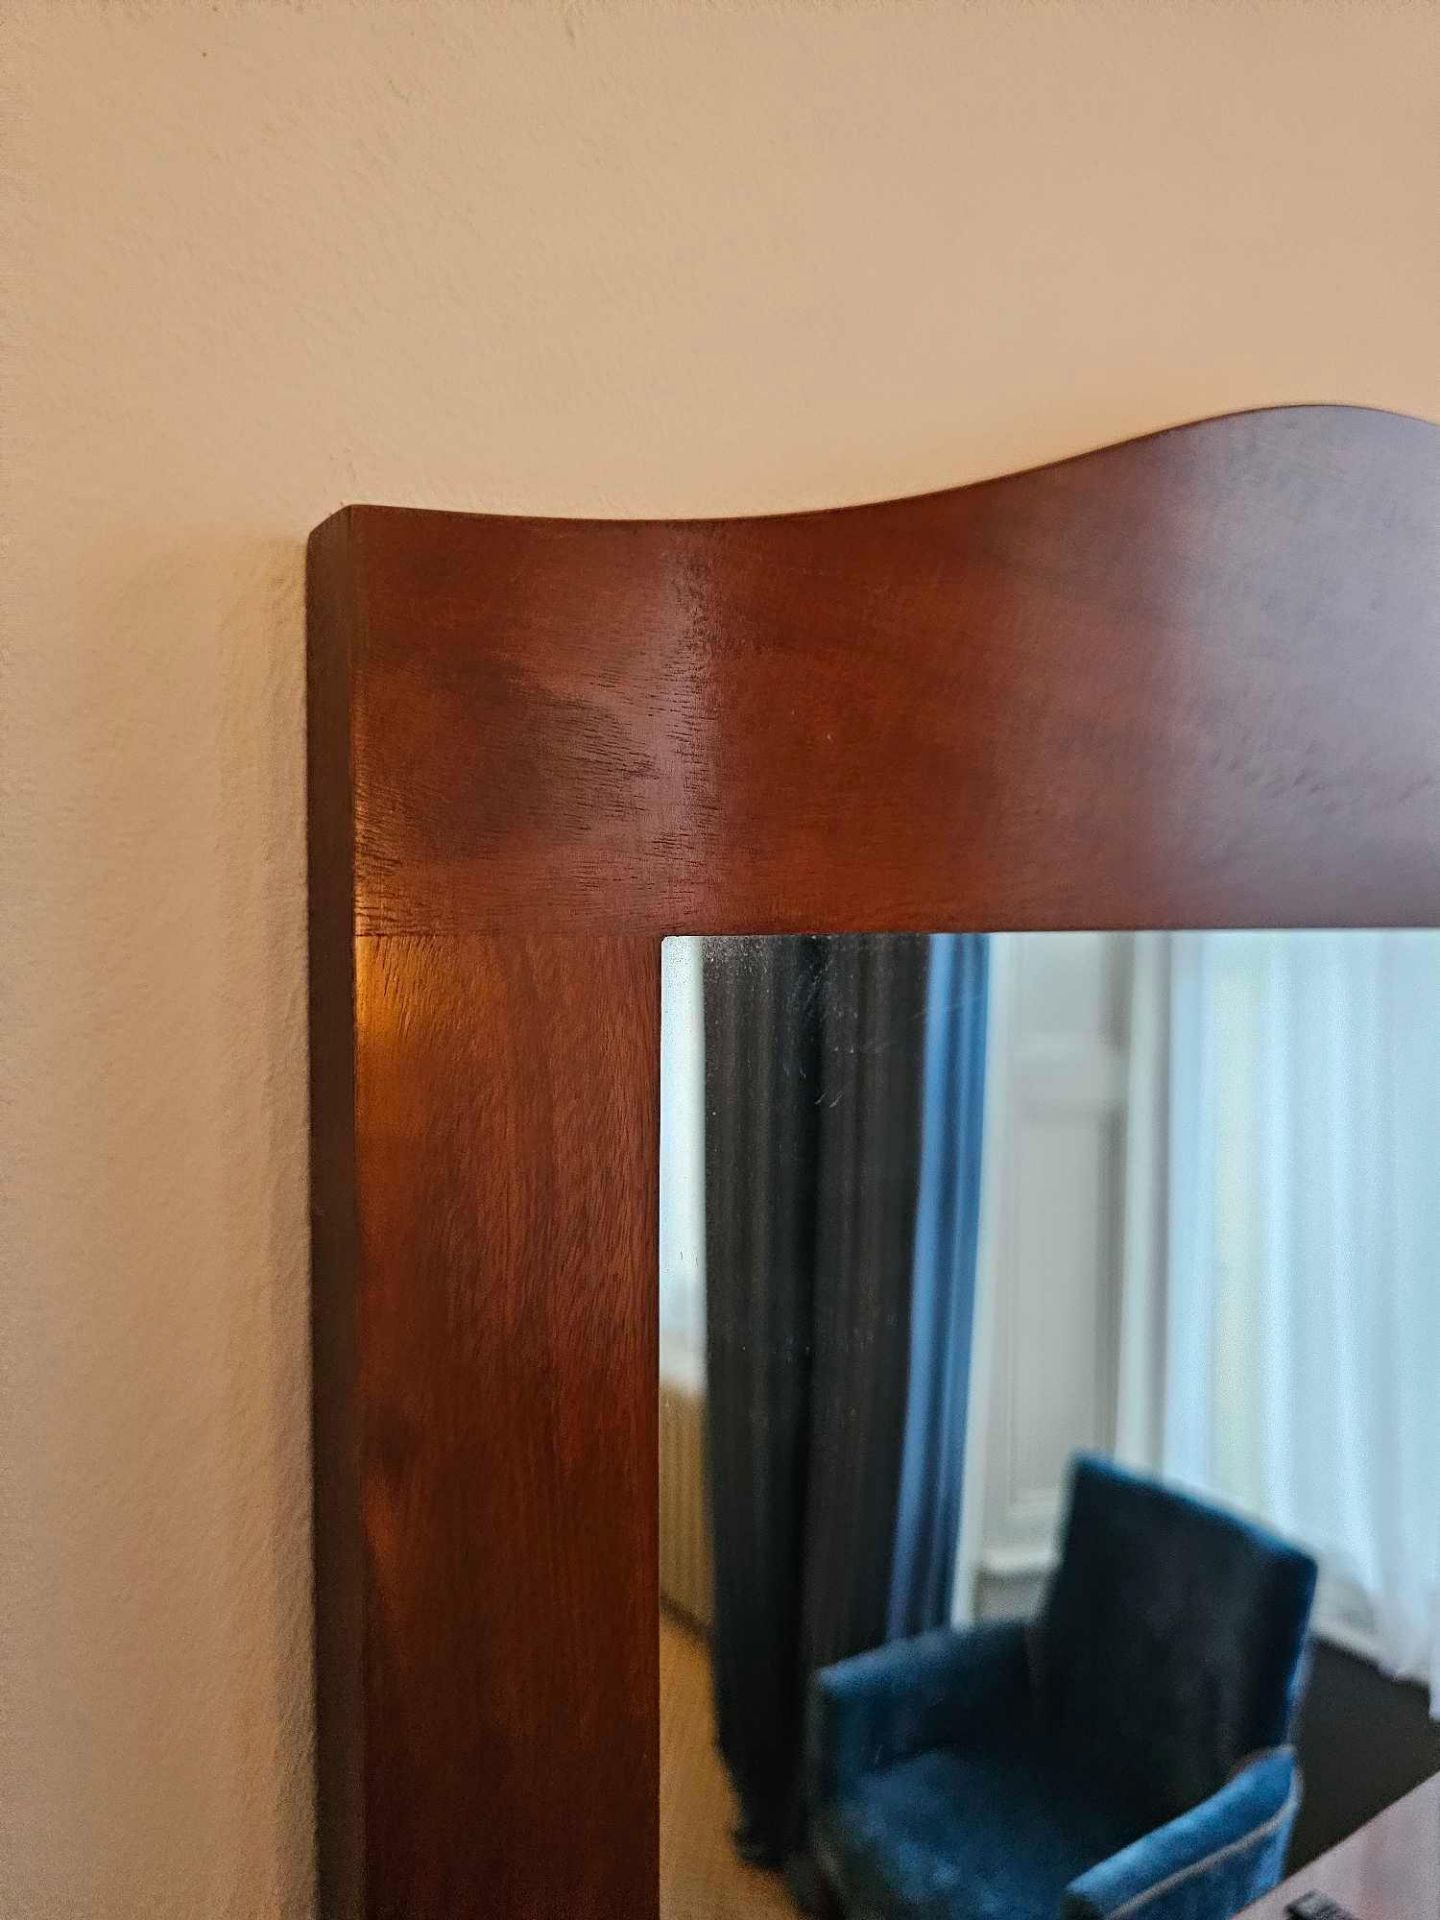 Mahogany Accent Mirror A Simple Shaped Frame With Dome Top Feature 60 x 80cm (Loc: Room 133) - Image 2 of 2